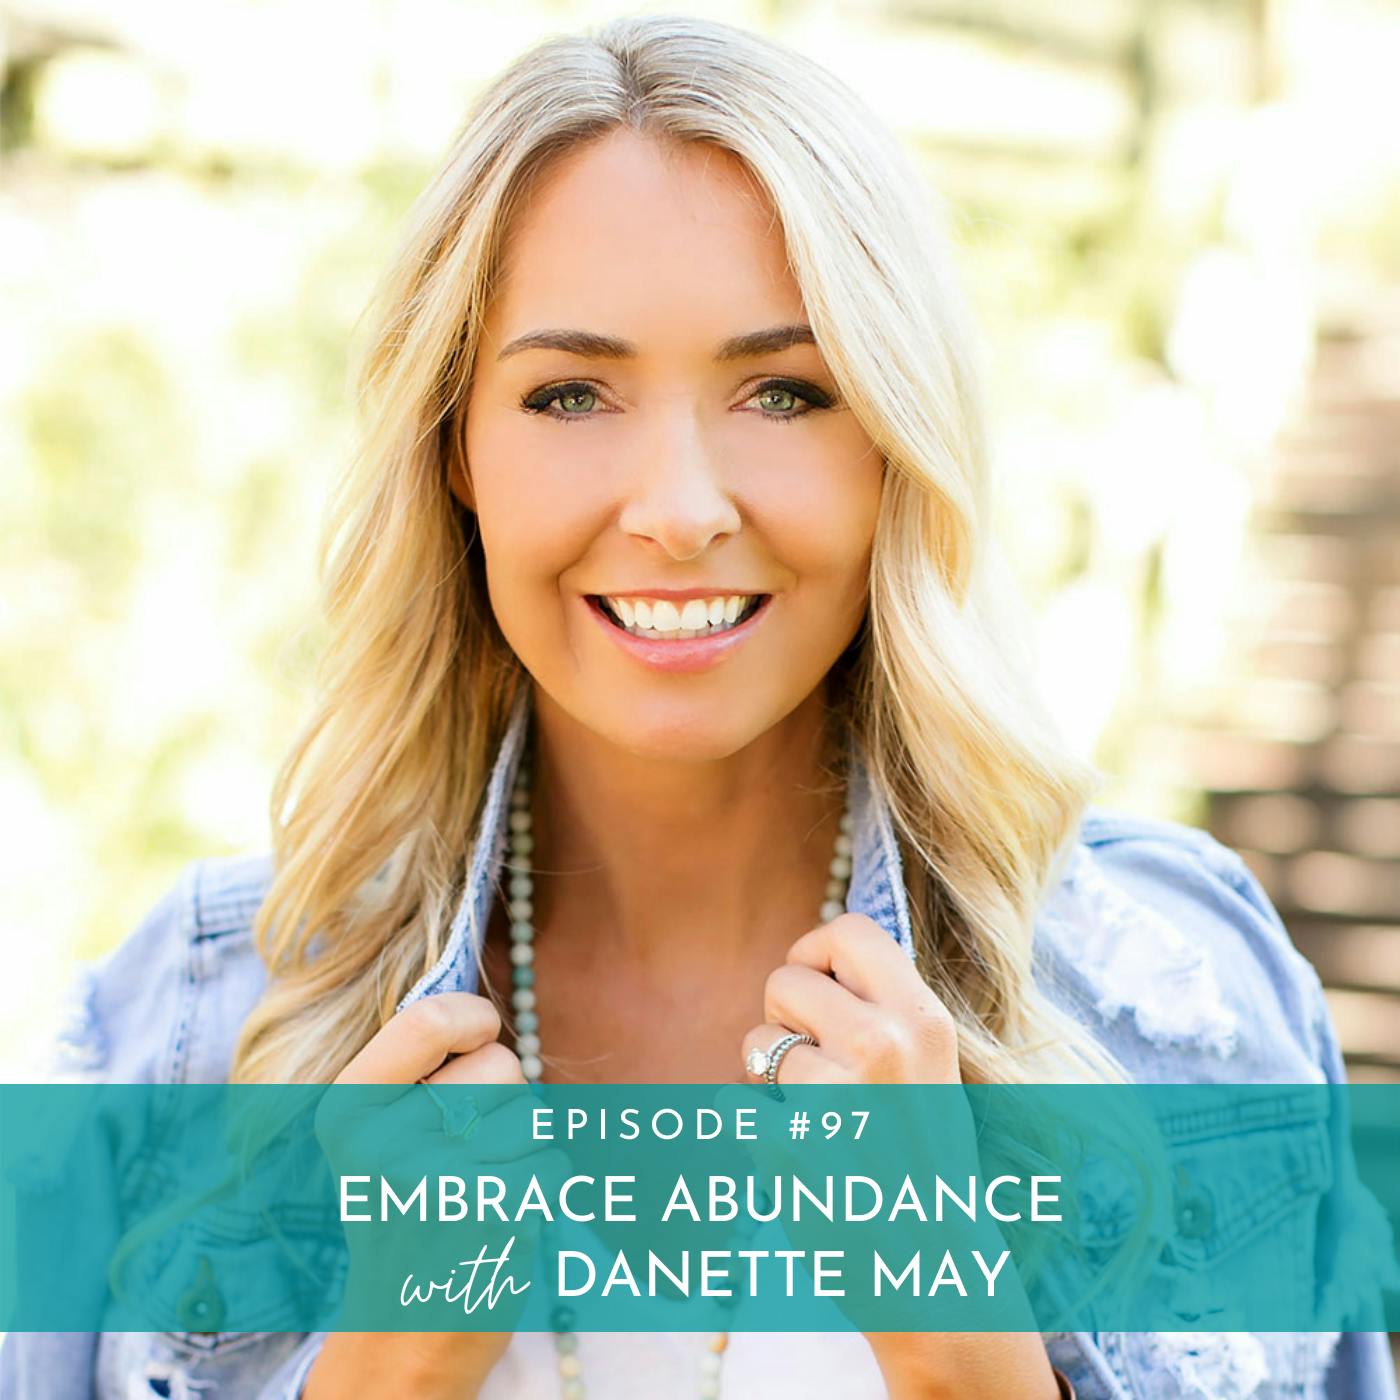 Embrace Abundance with Danette May